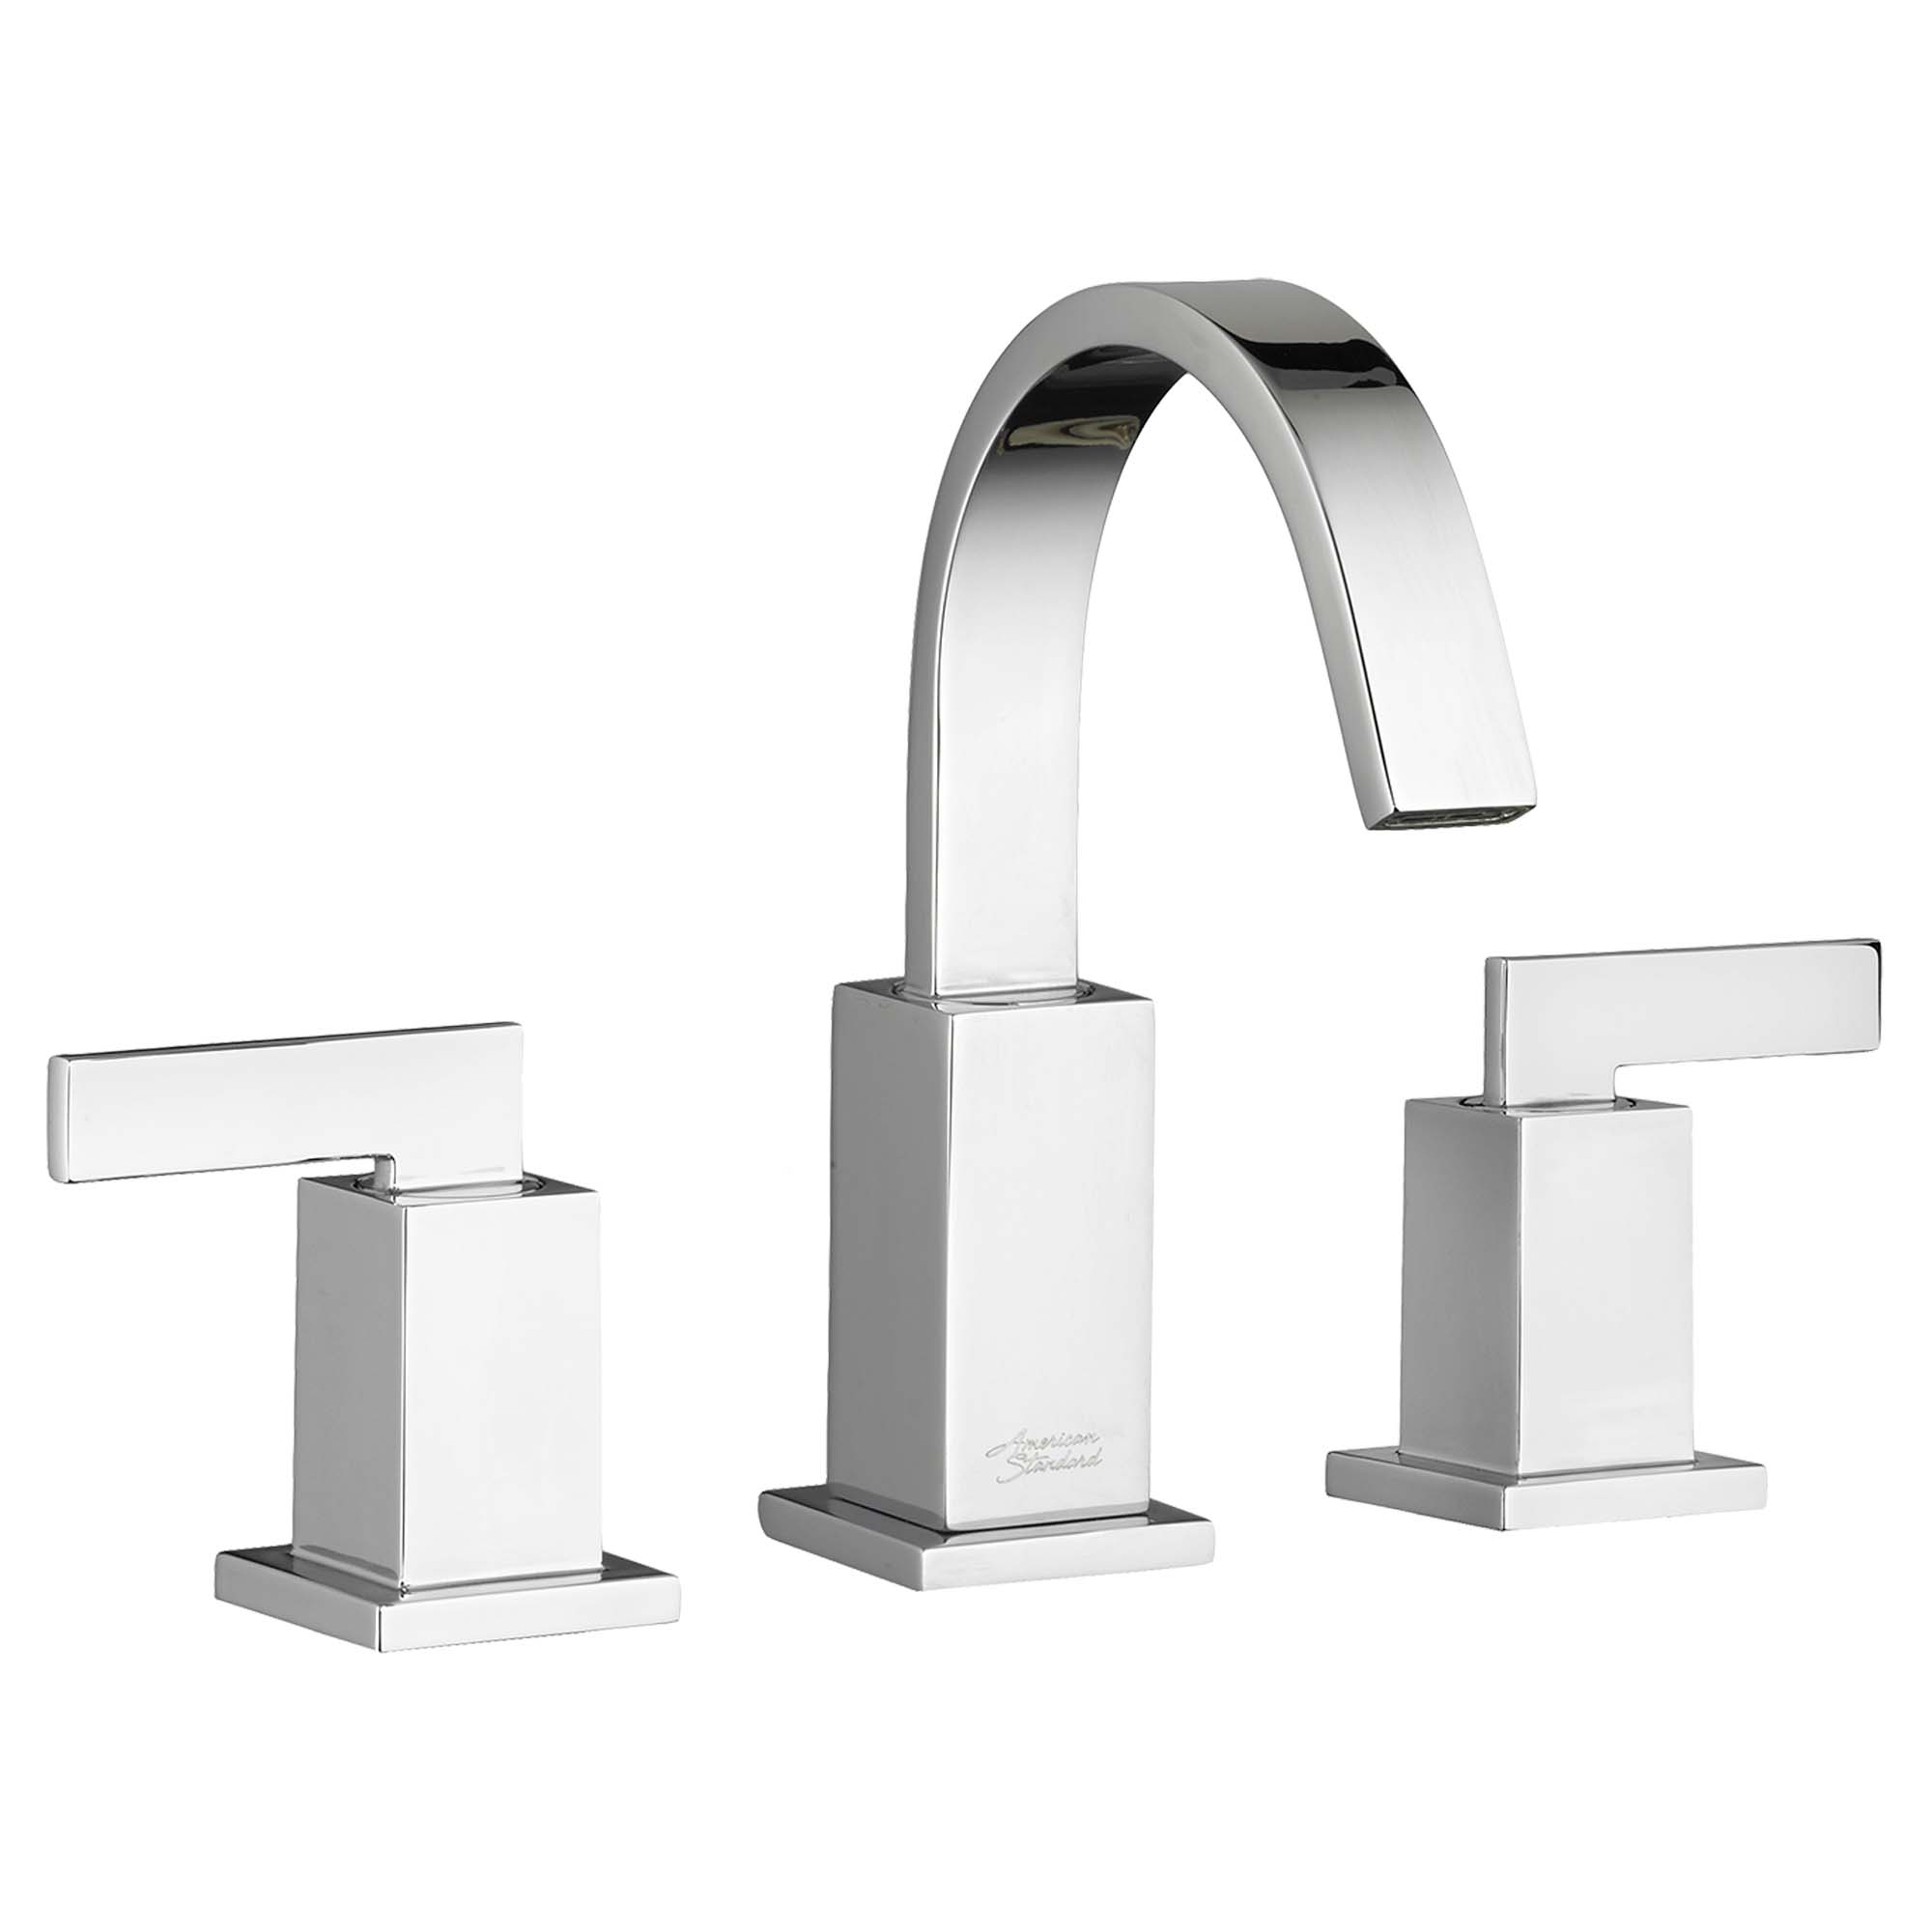 Time Square™ 8-Inch Widespread 2-Handle Bathroom Faucet 1.2 gpm/4.5 L/min With Lever Handles